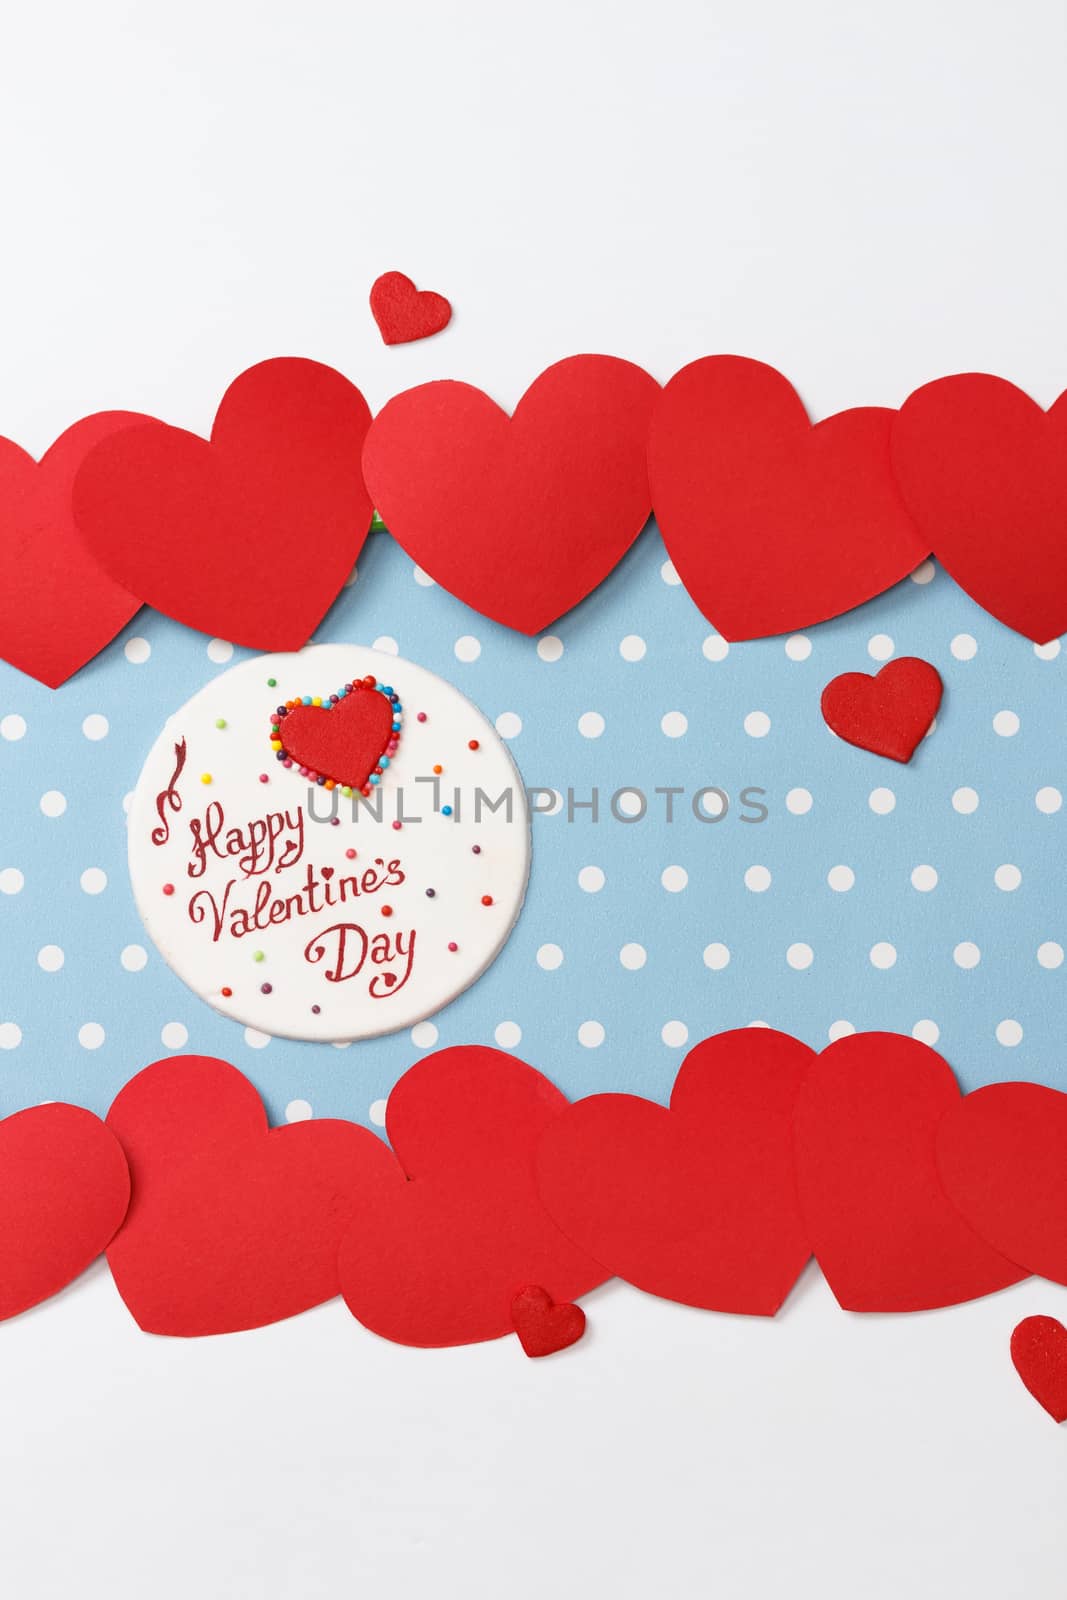 Valentine's day love message, handmade, isolated on blue with white dots background (polka dot) with white borders